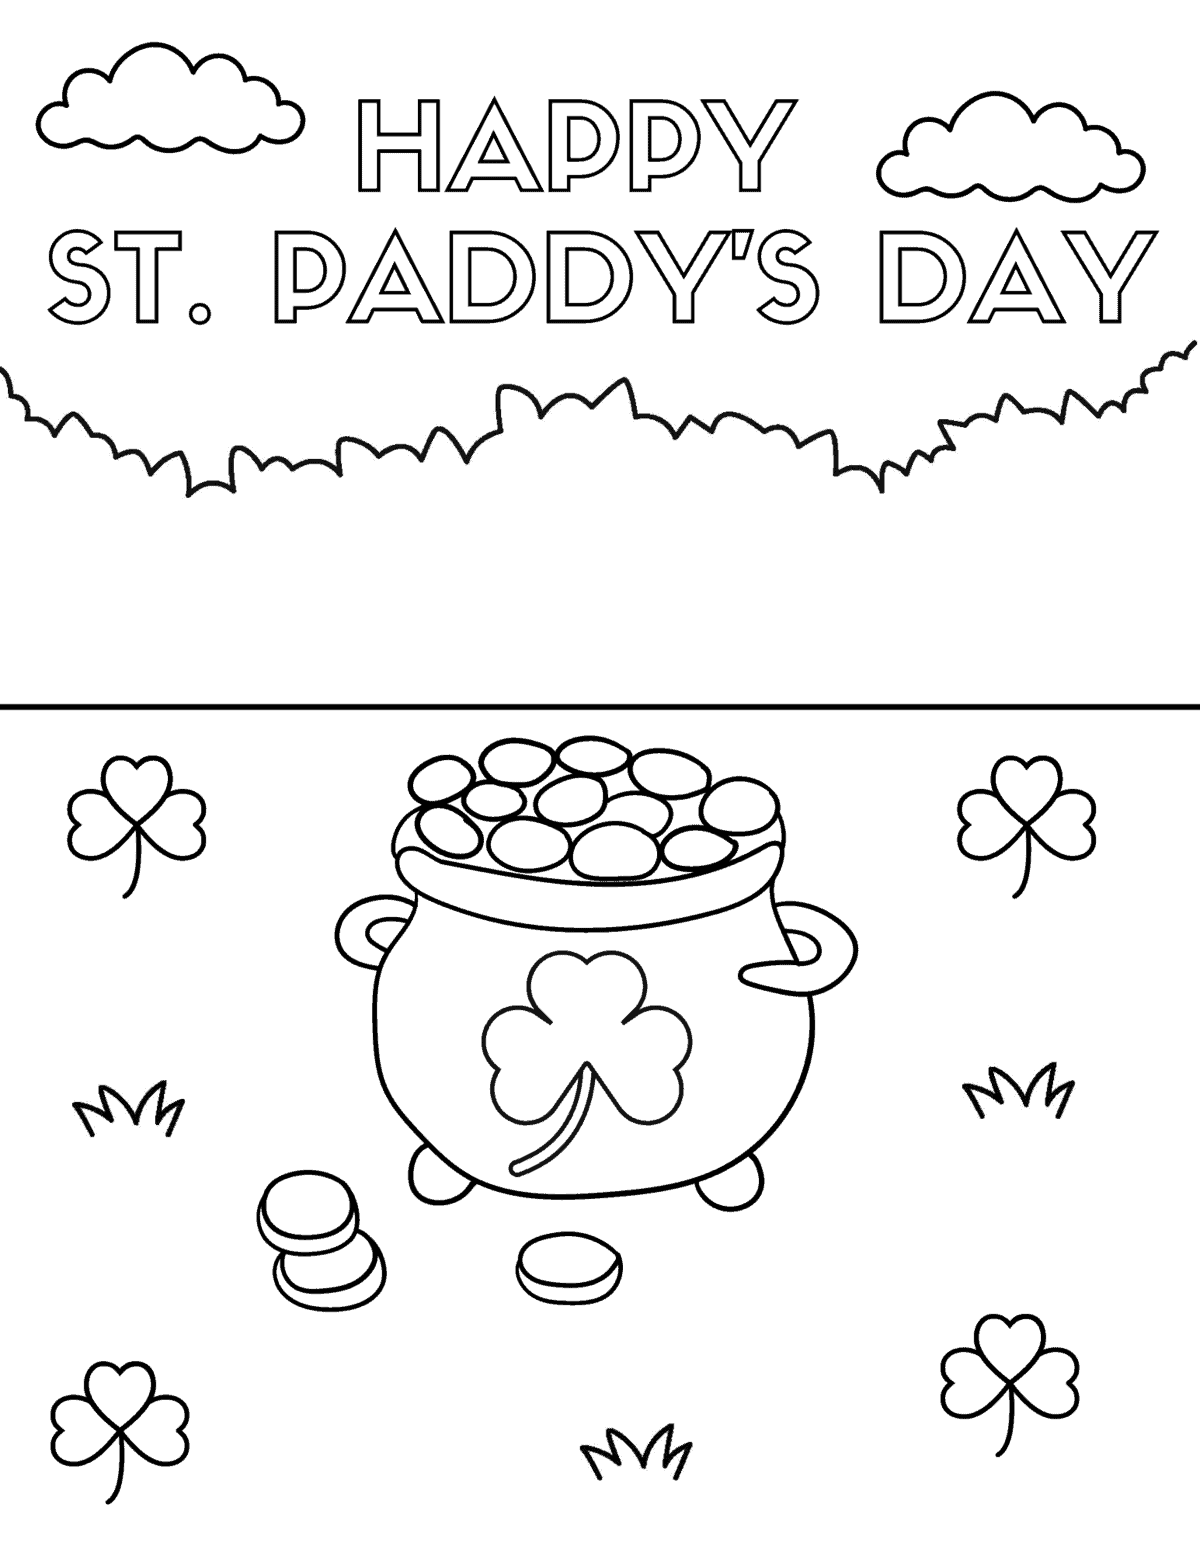 happy st patricks day coloring page with pot of gold